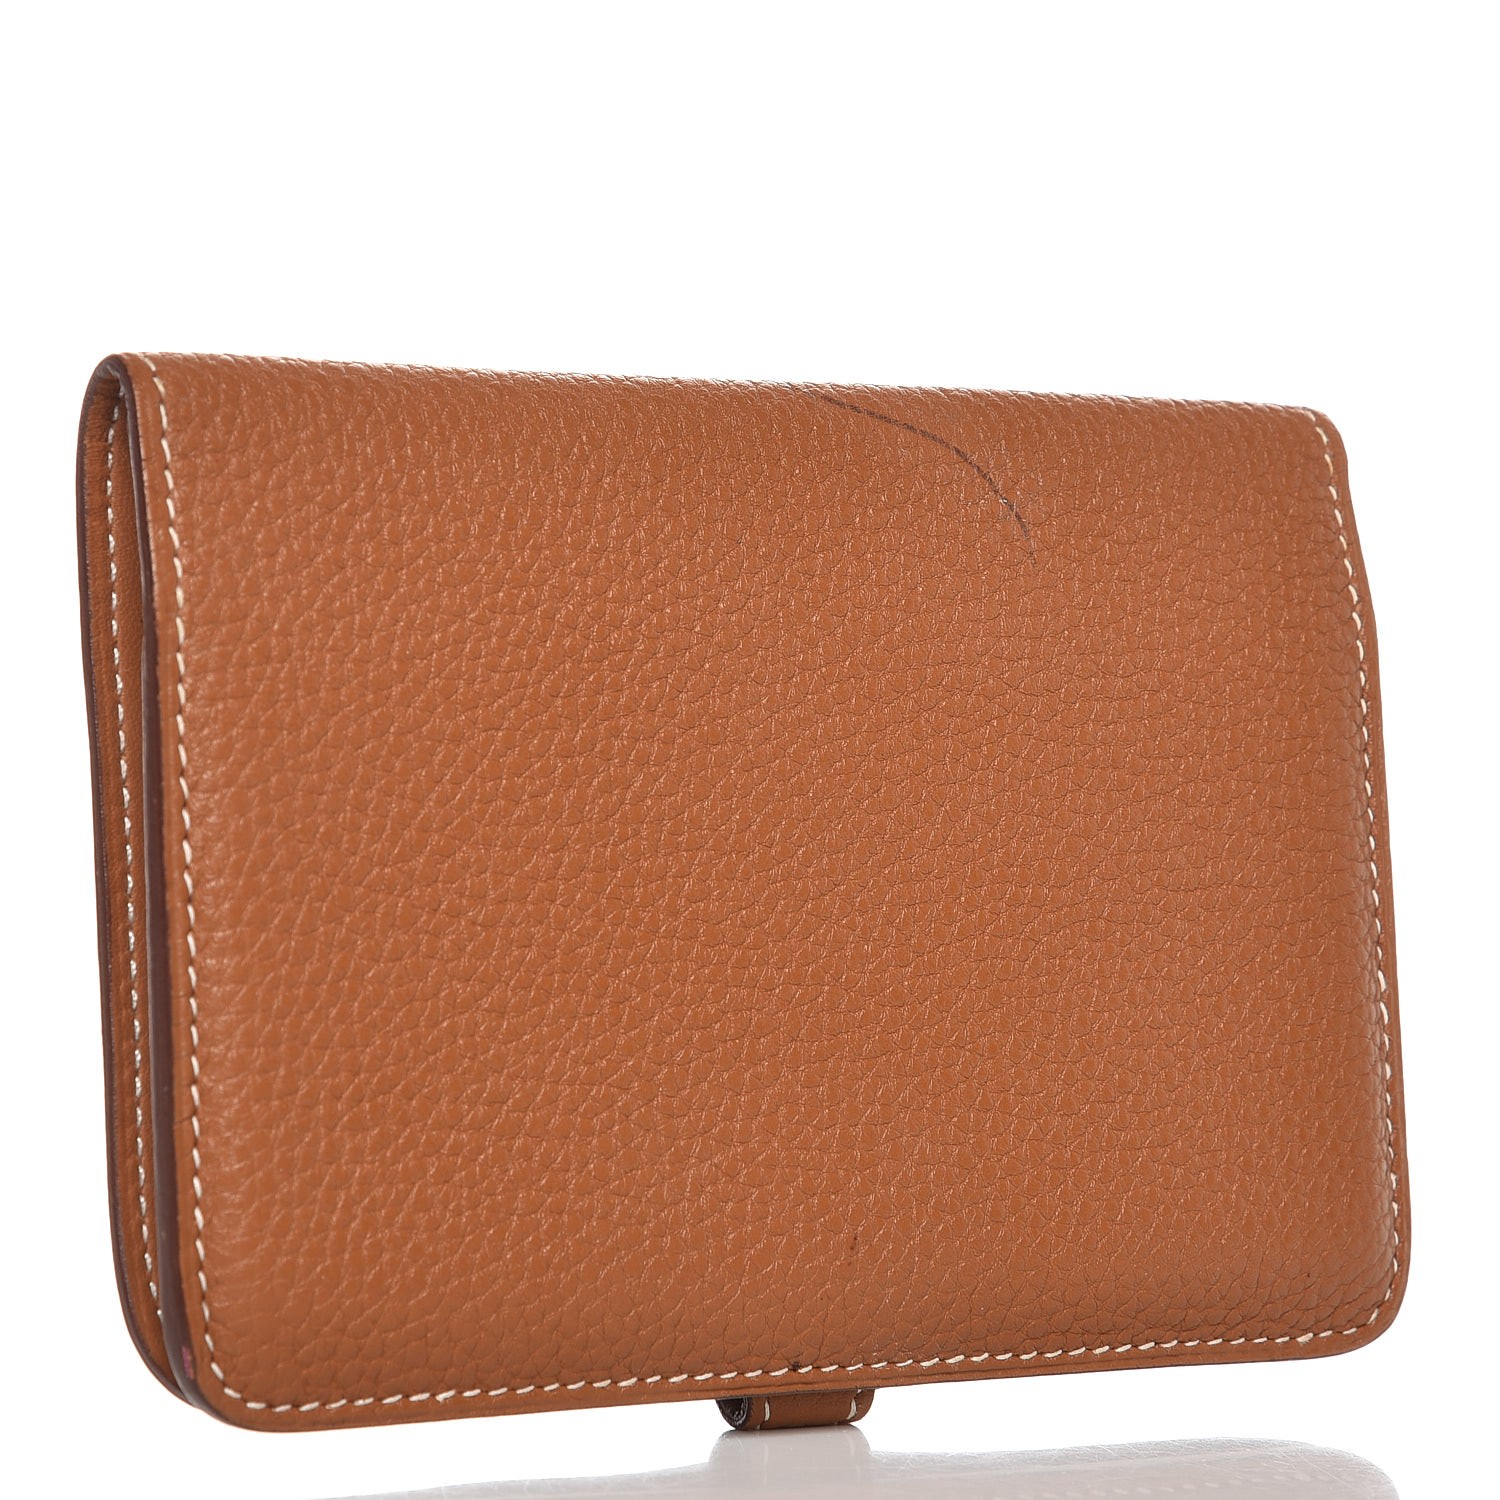 HERMES Togo Dogon Compact Wallet Gold 266795